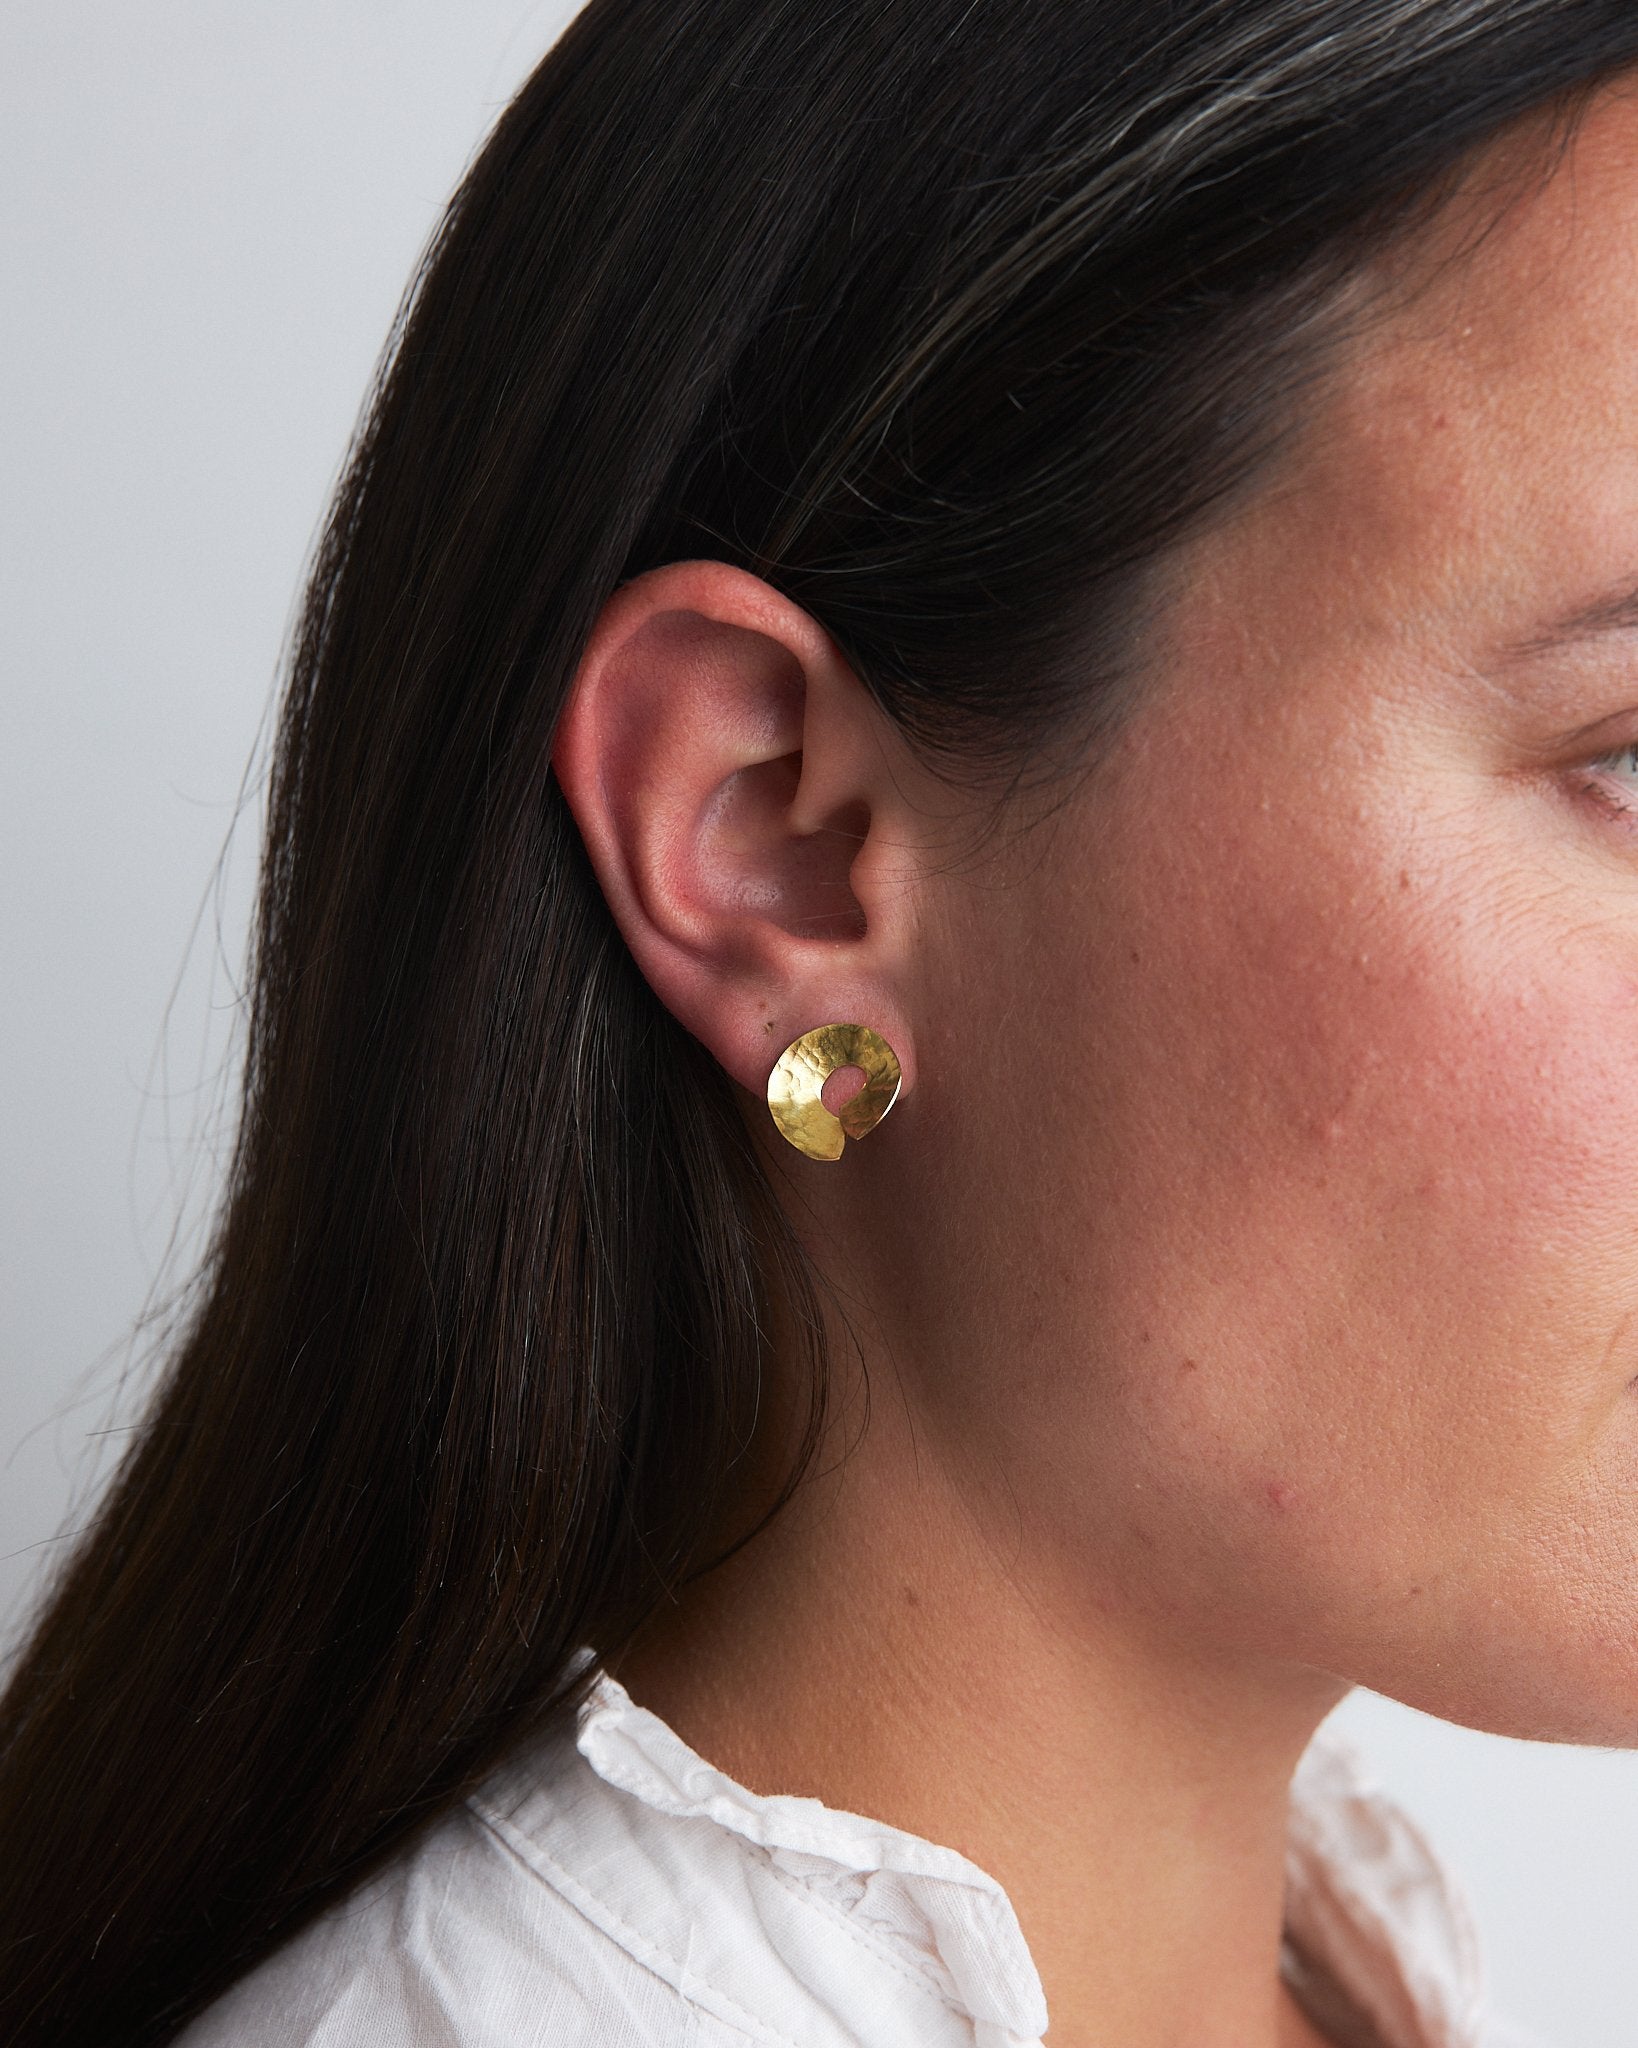 Codium Studs: handmade earrings in recycled brass, based on the shape of the ends of codium seaweed. Worn by a model.